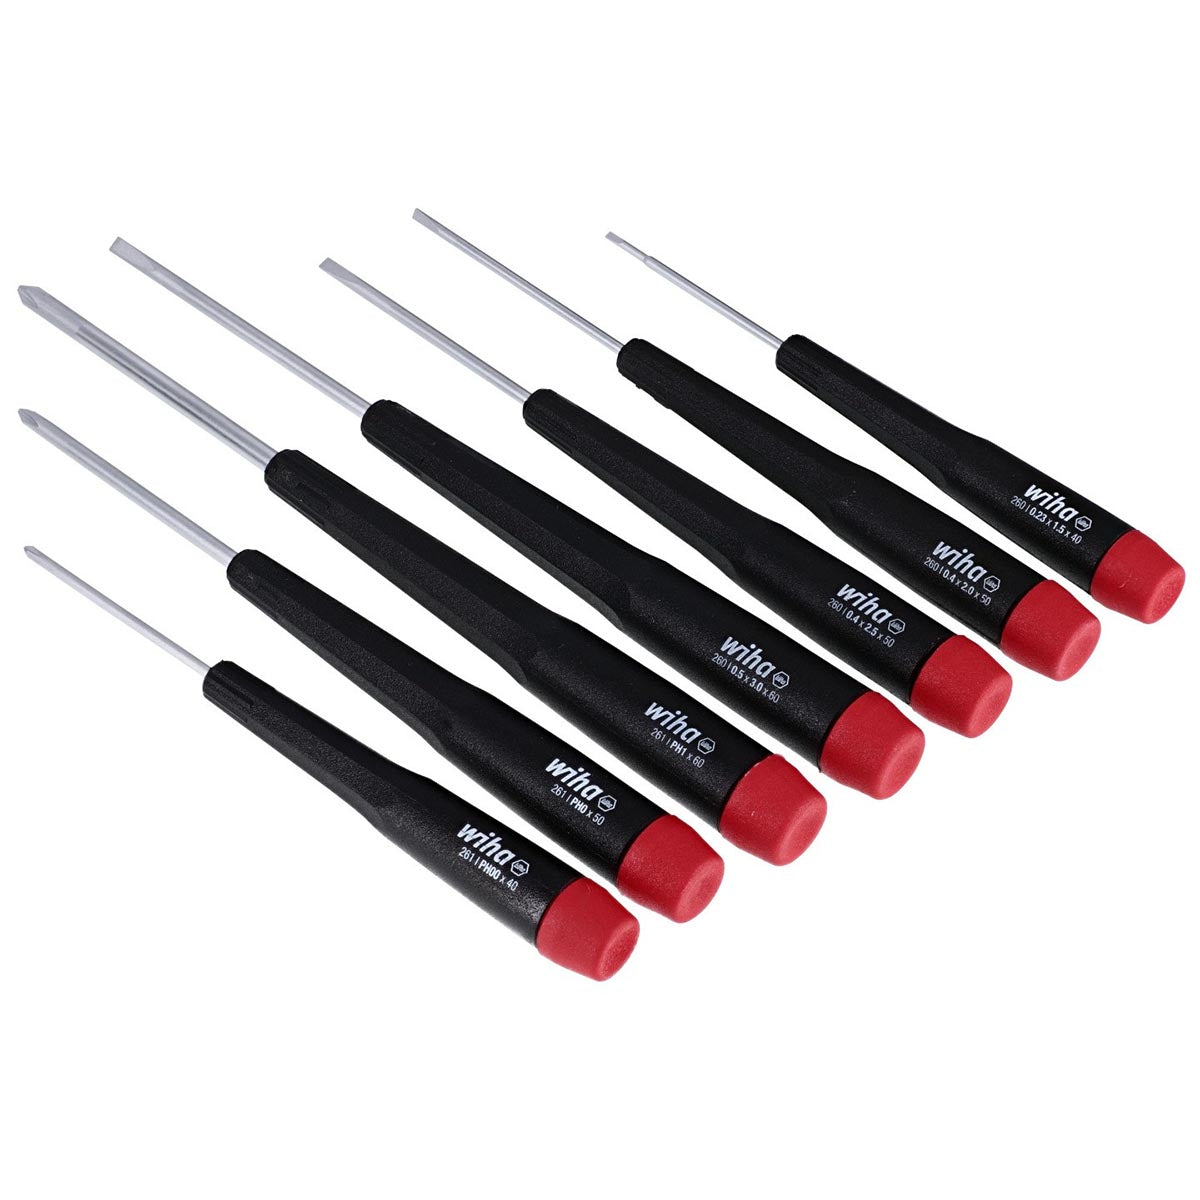 Wiha 26197 Precision Slotted and Phillips Screwdriver Set (7 Piece Set)